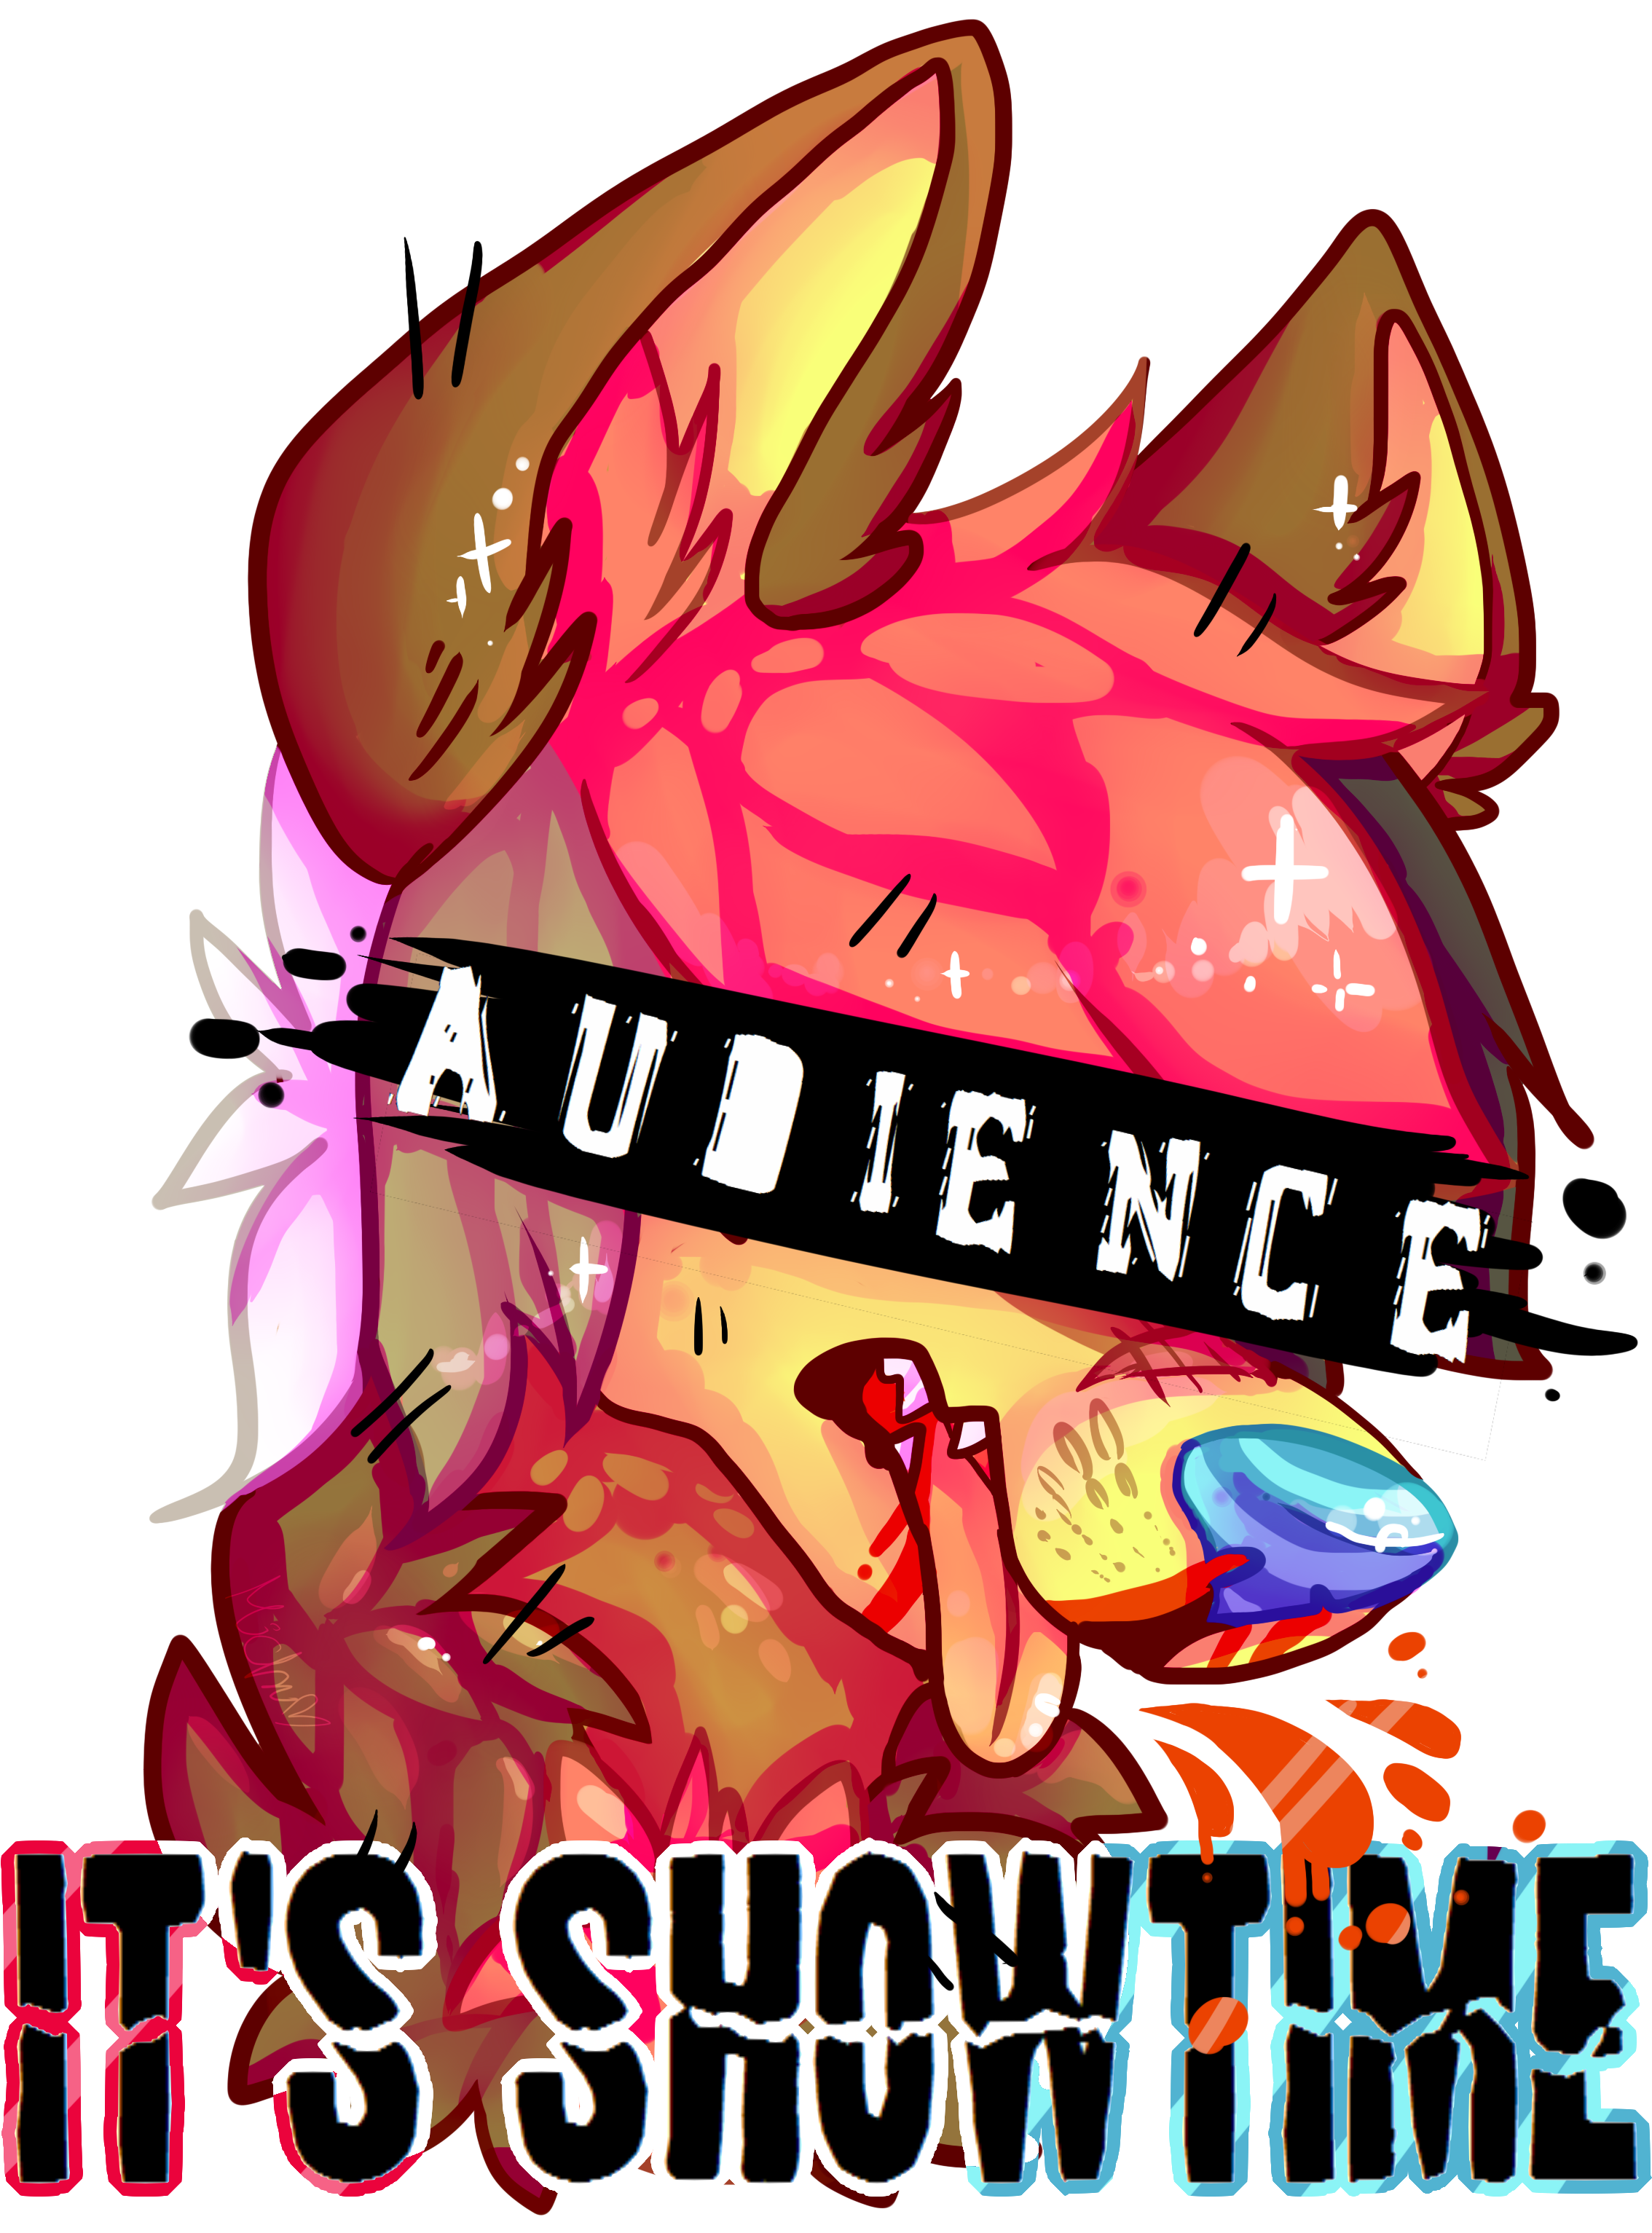 Itss Shoowtime By Squirrelings Itss Shoowtime By Squirrelings - Graphic Design (2400x3200)